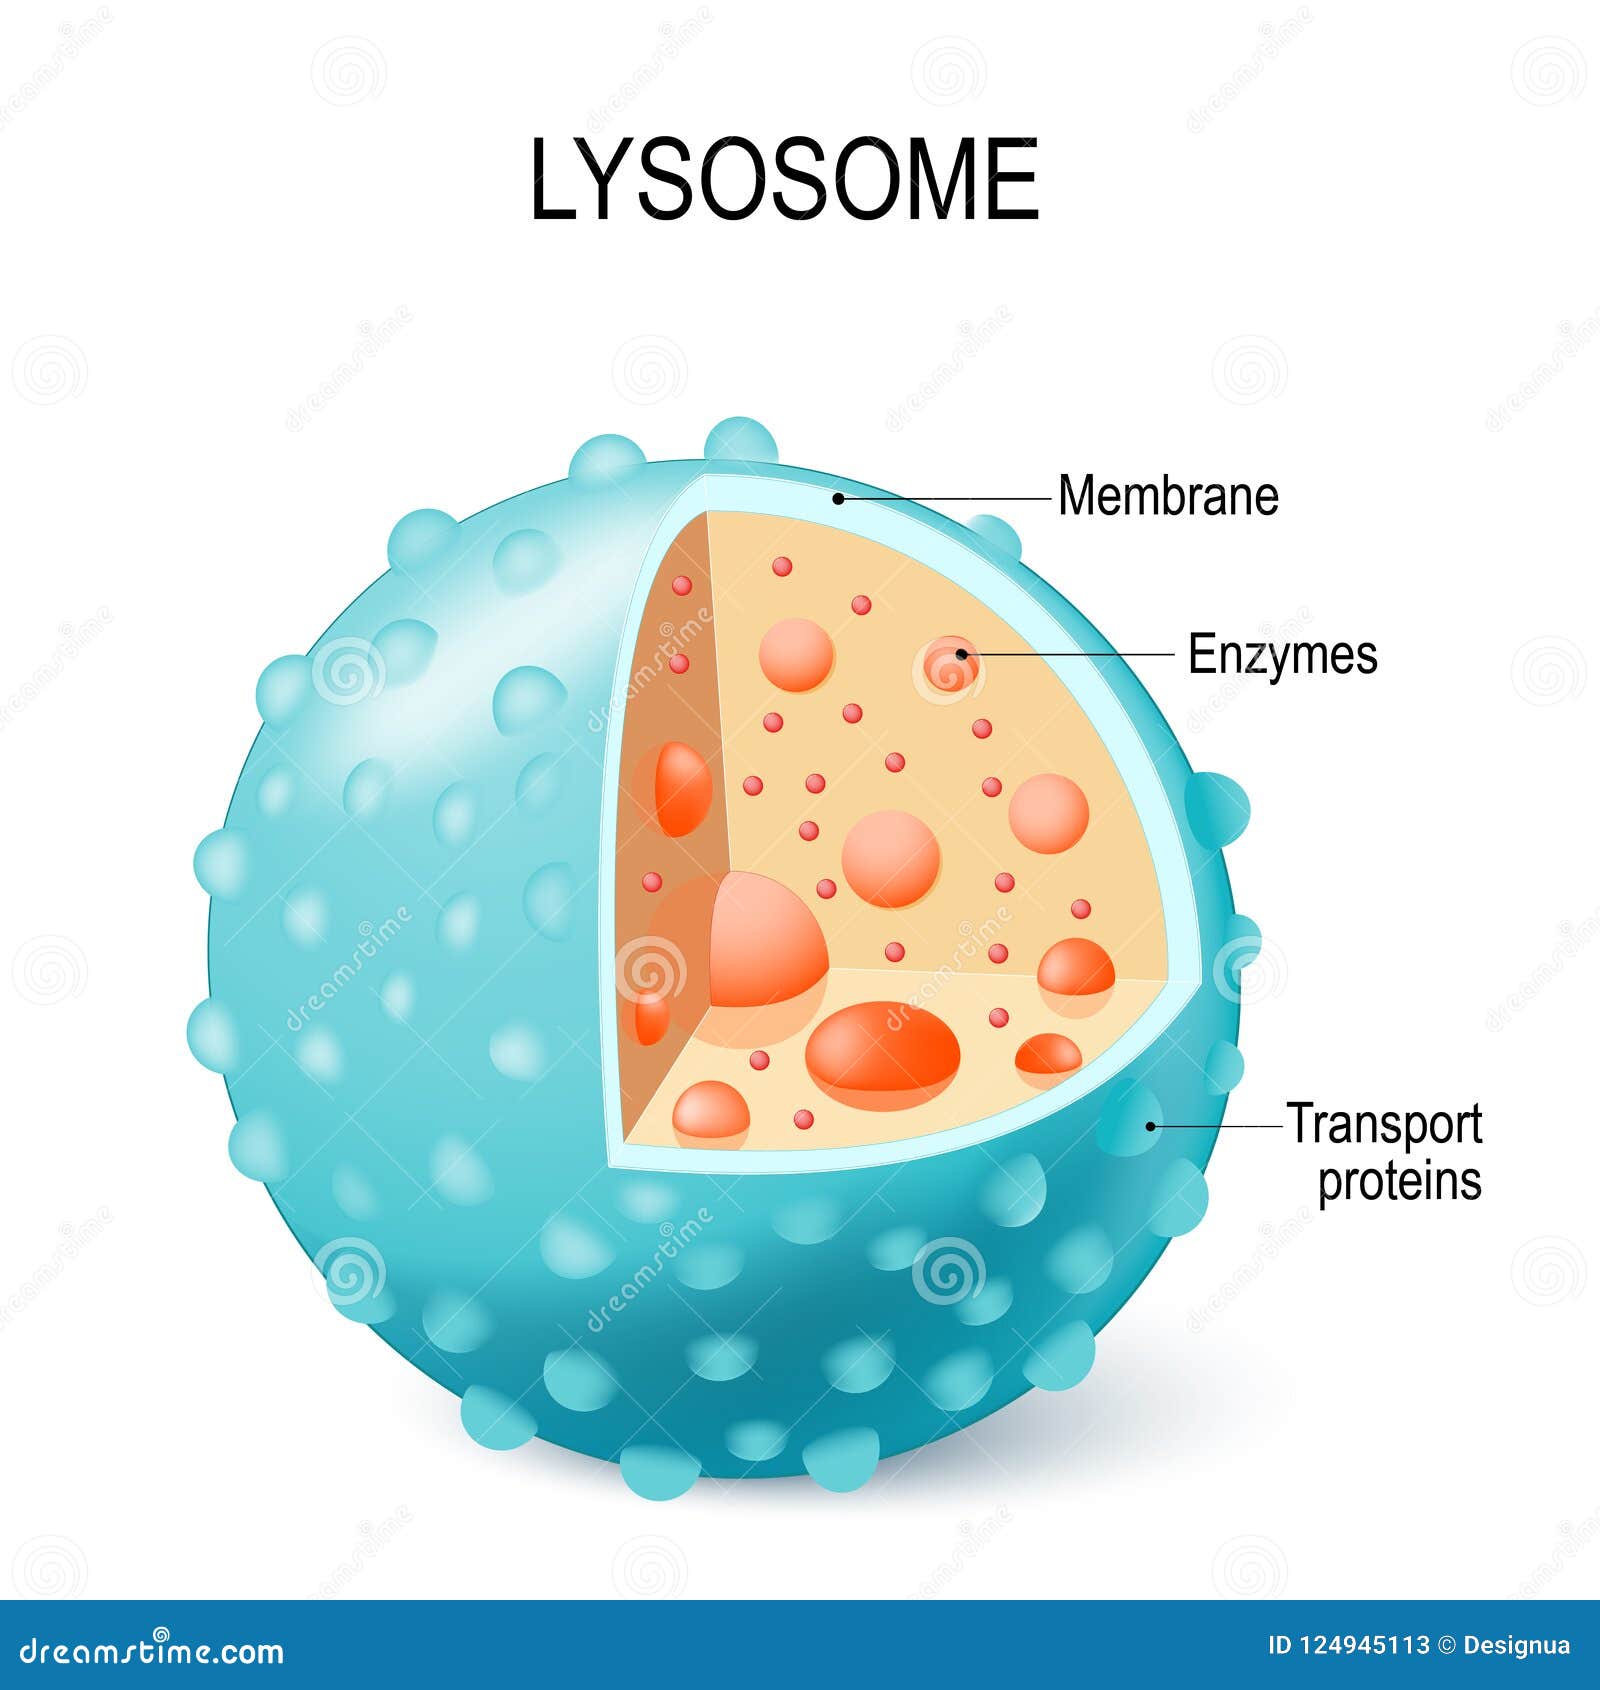 Lysosome Cartoons, Illustrations & Vector Stock Images ... diagram of cell and organelles 